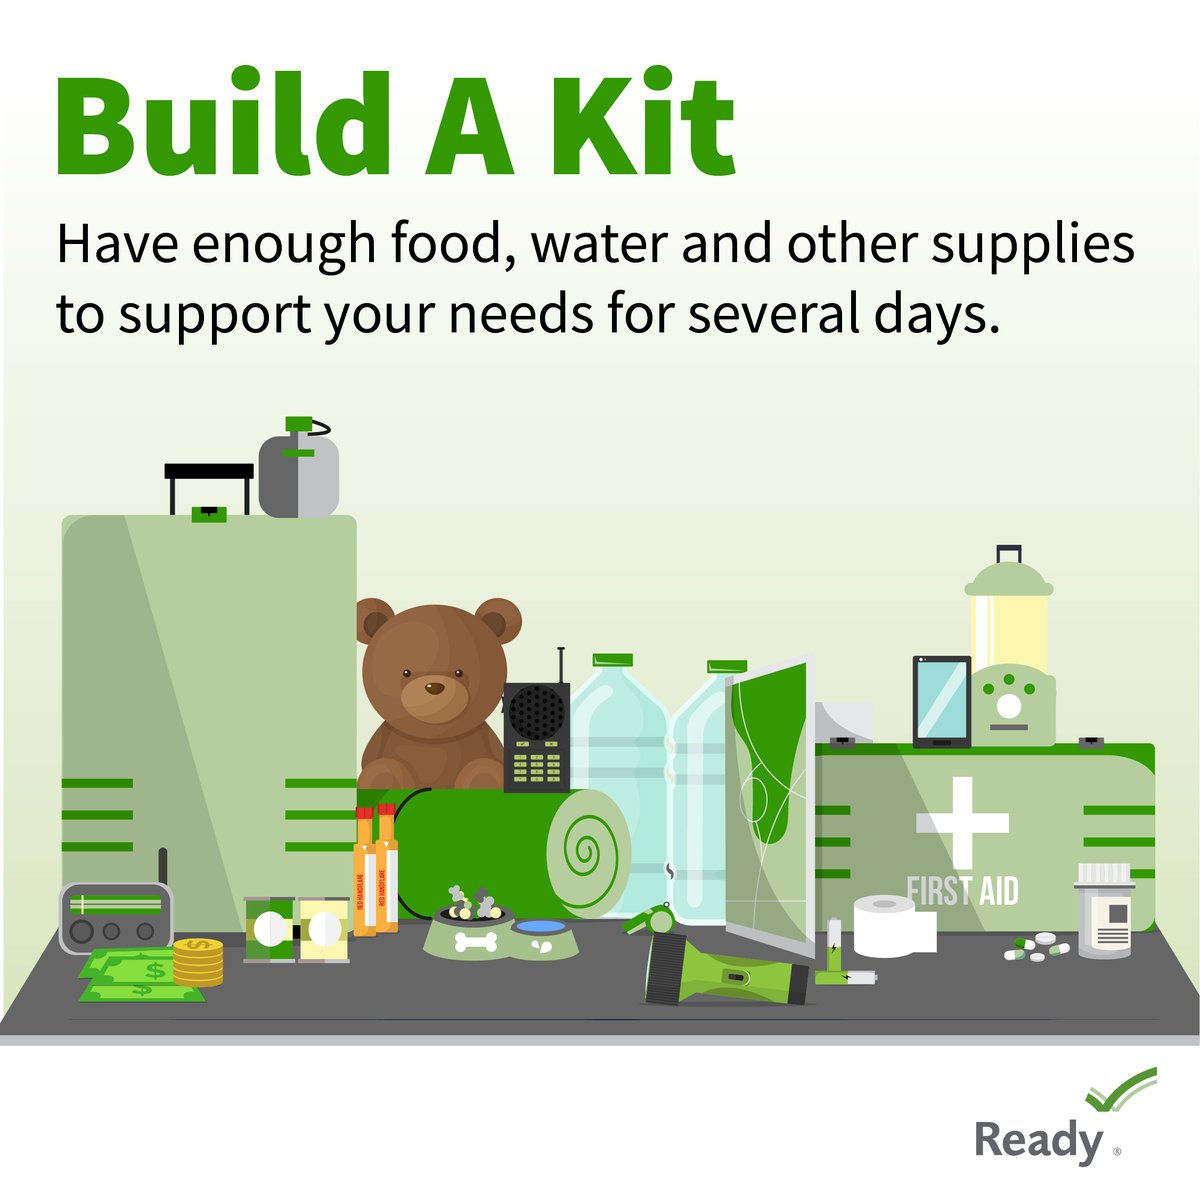 Severe weather can strike at any time. There's no way to know where you'll be! Make sure you and your loved ones are prepared. Prepare an emergency kit for home, work, and cars with food, water, and supplies to last several days. ready.gov/kit